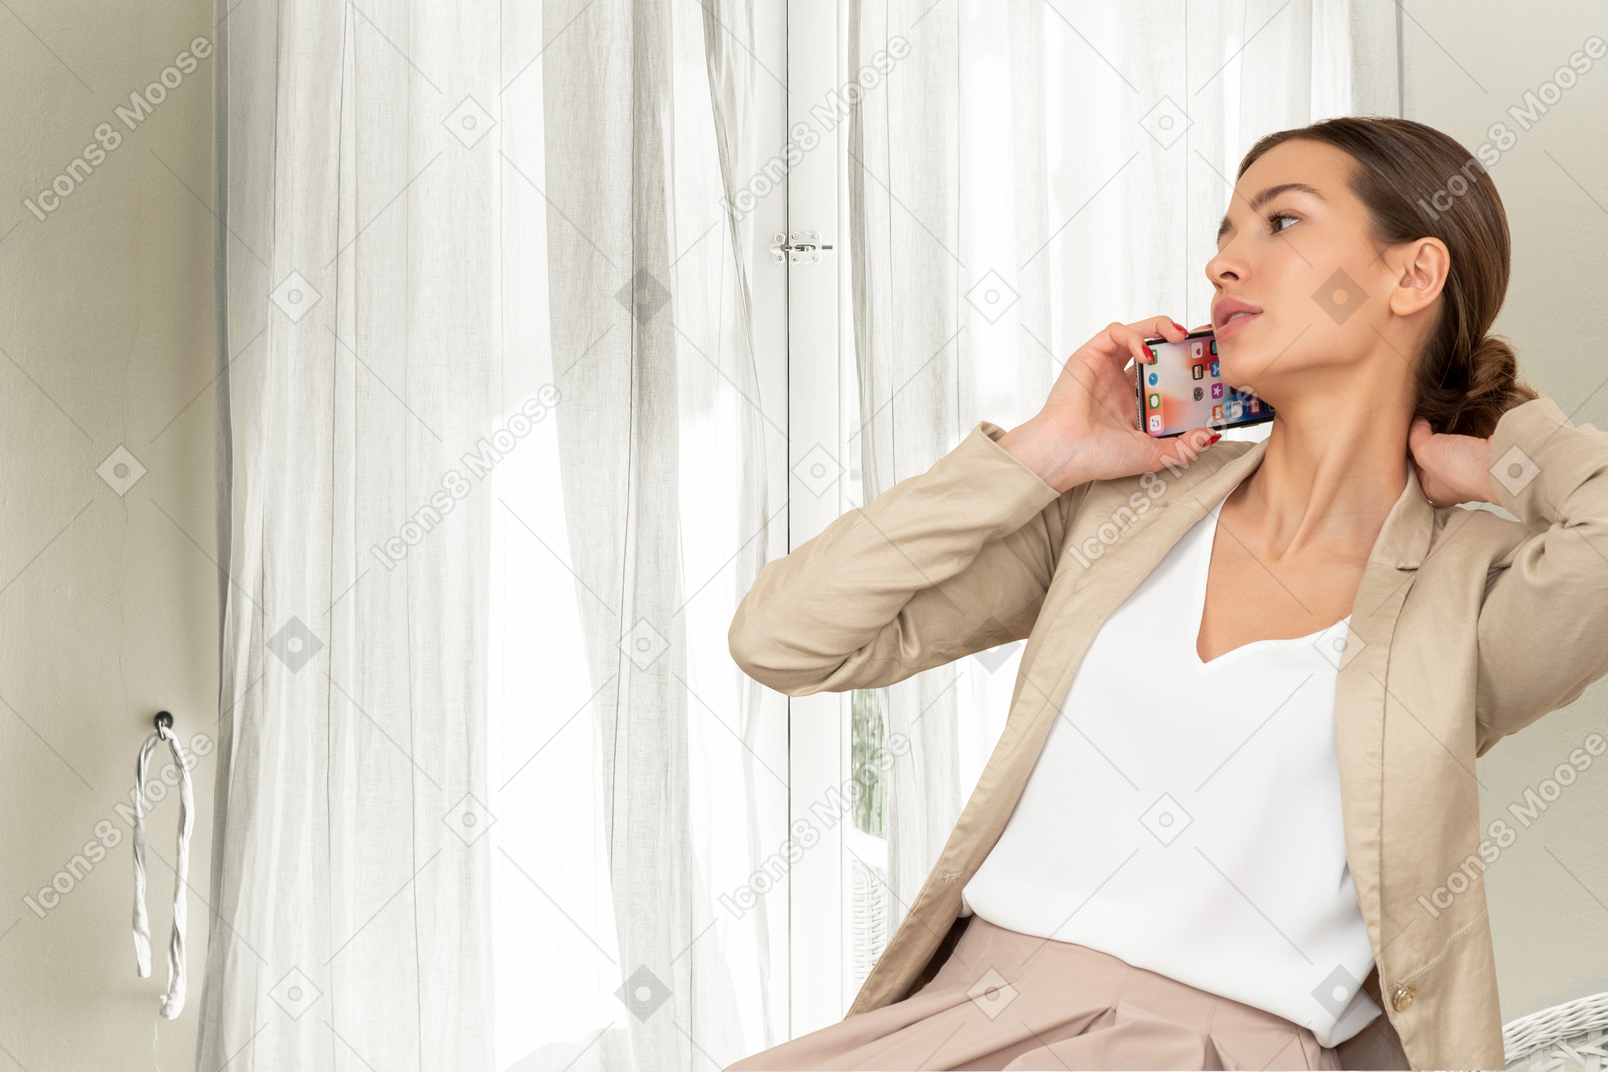 A woman sitting at the window talking on a cell phone